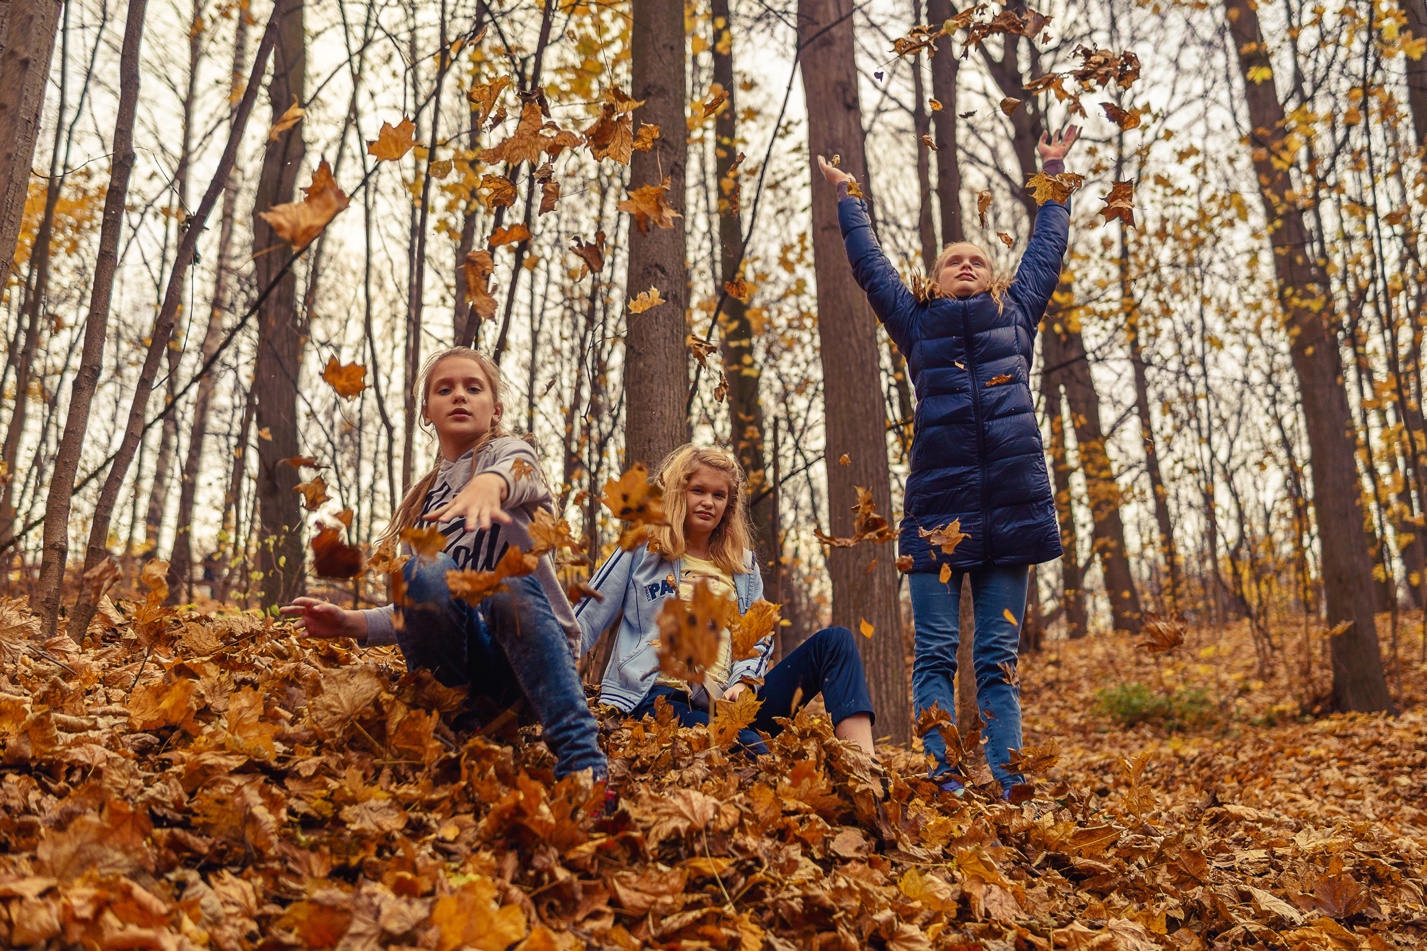 A group of girls throwing leaves in the air

Description automatically generated